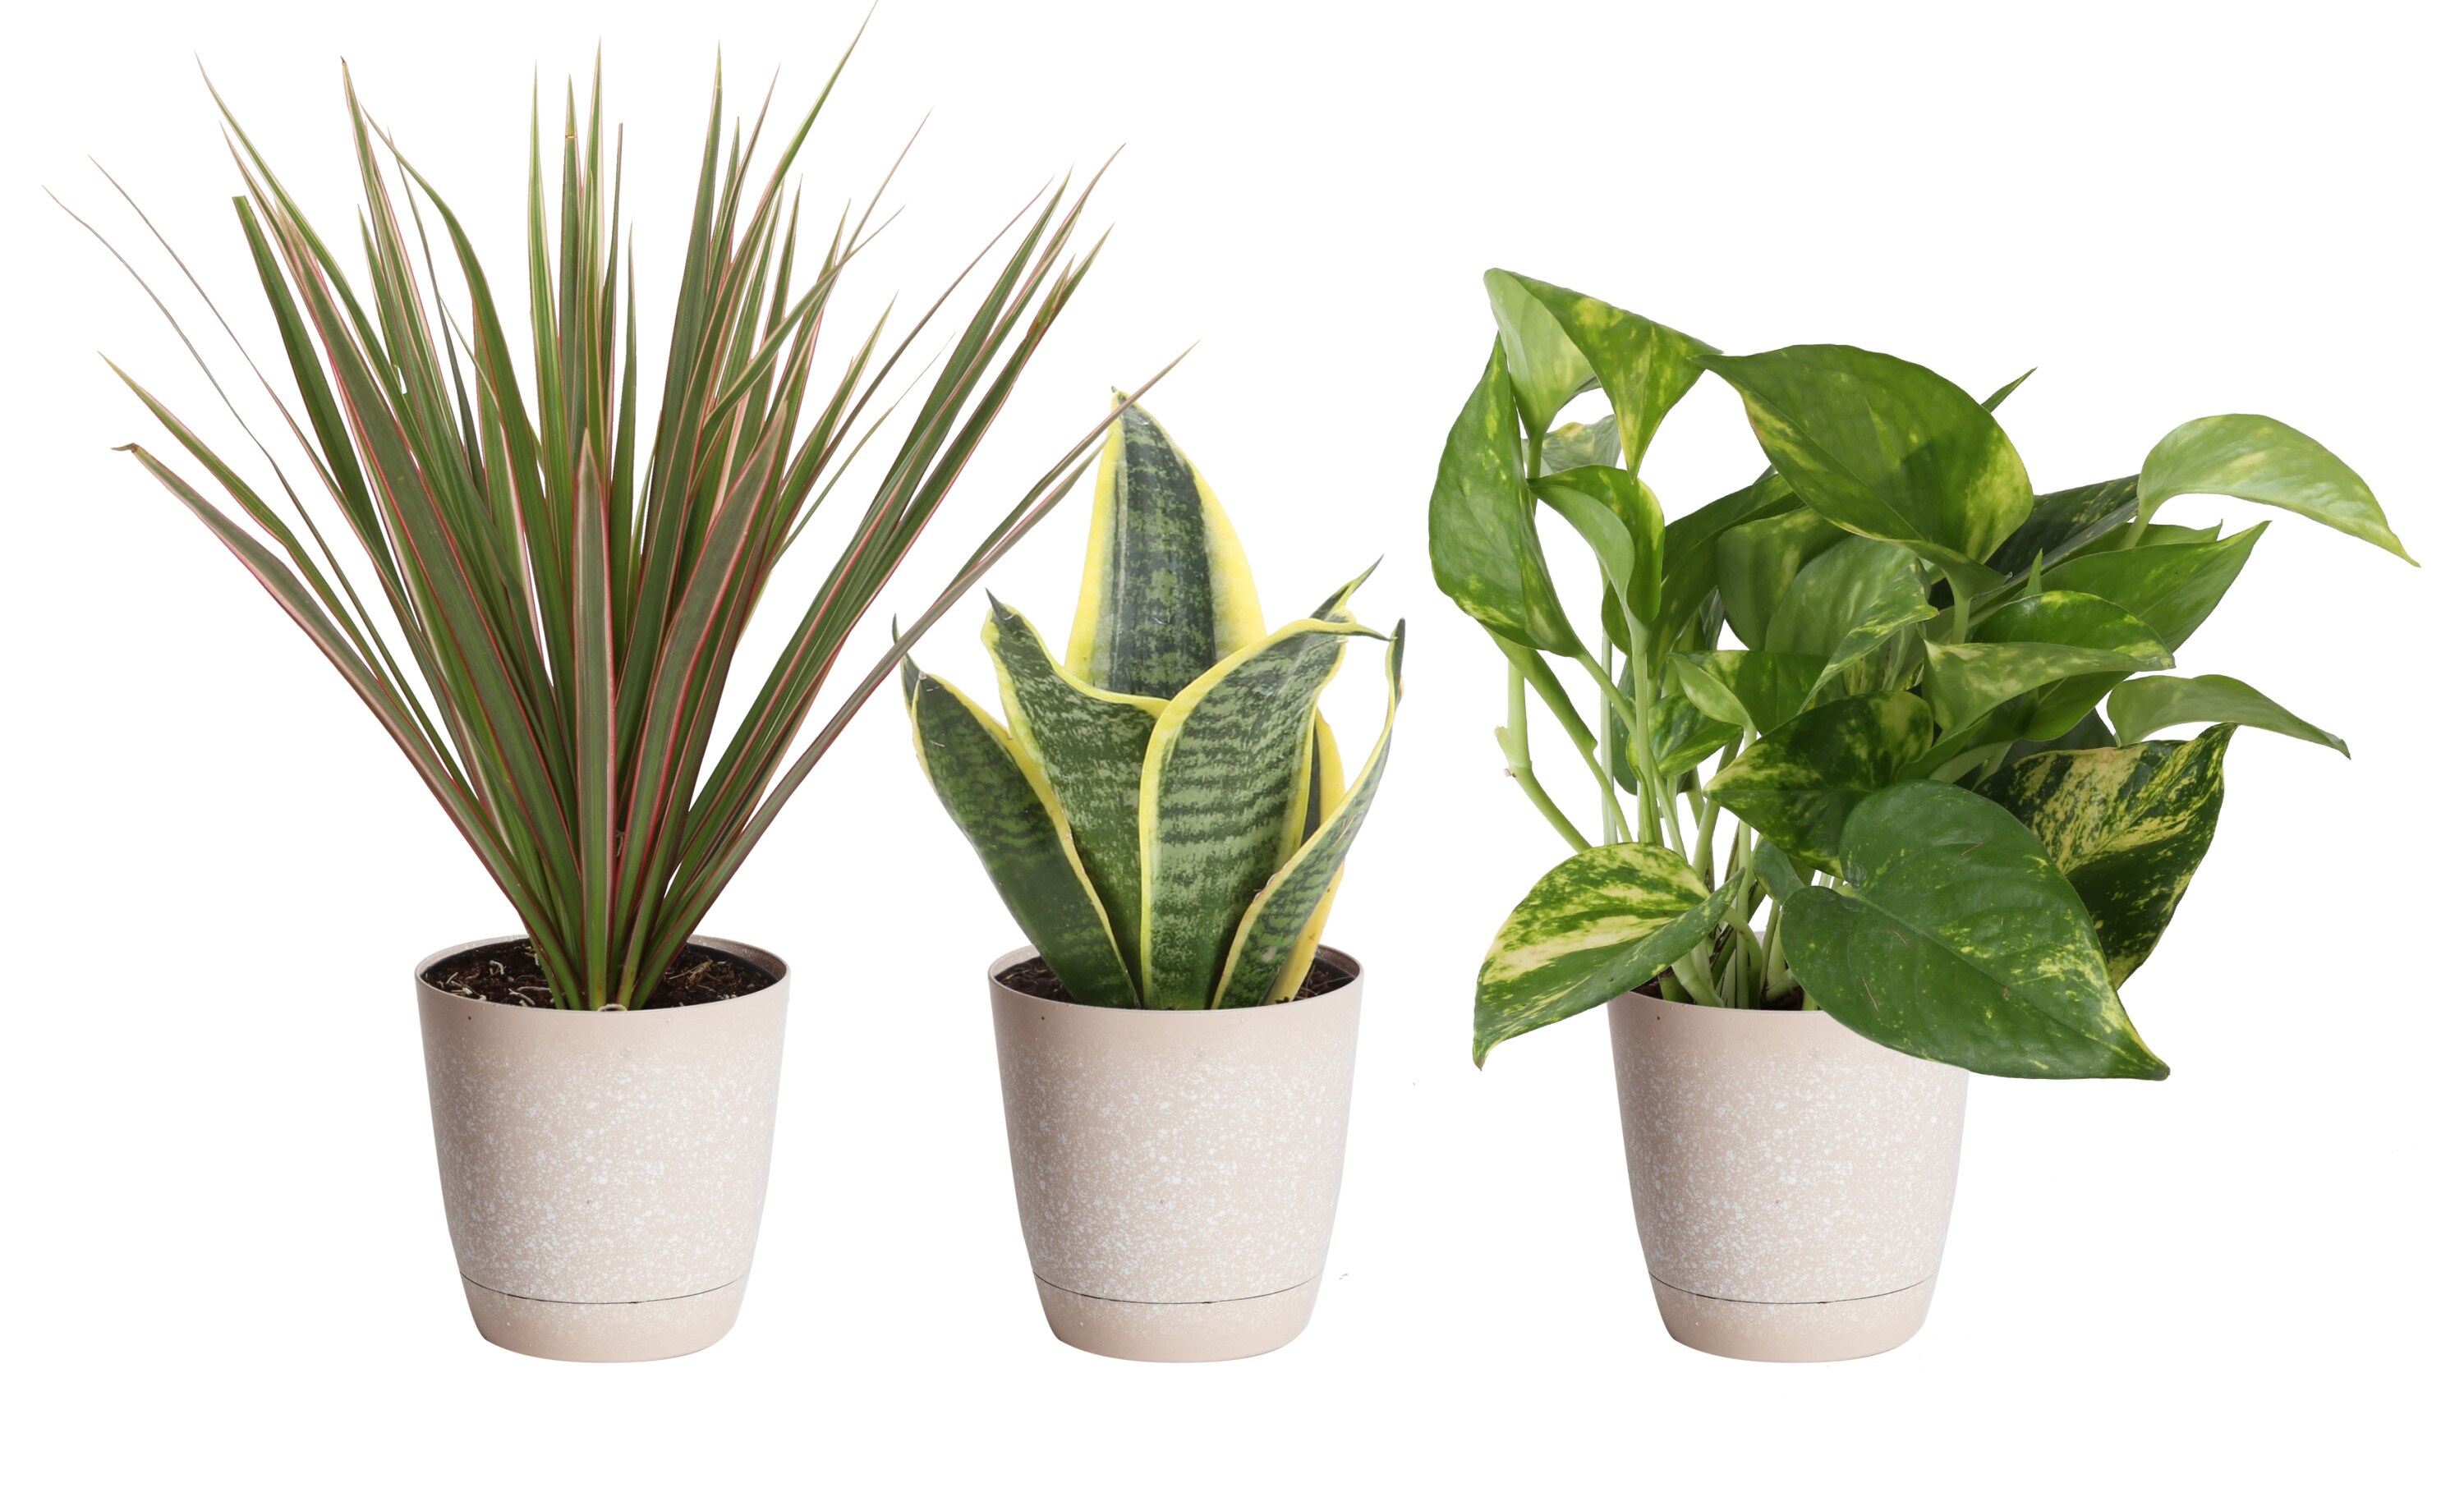 Costa Farms Assorted Foliage Plant in 4-in Pot 3-Pack in department at Lowes.com